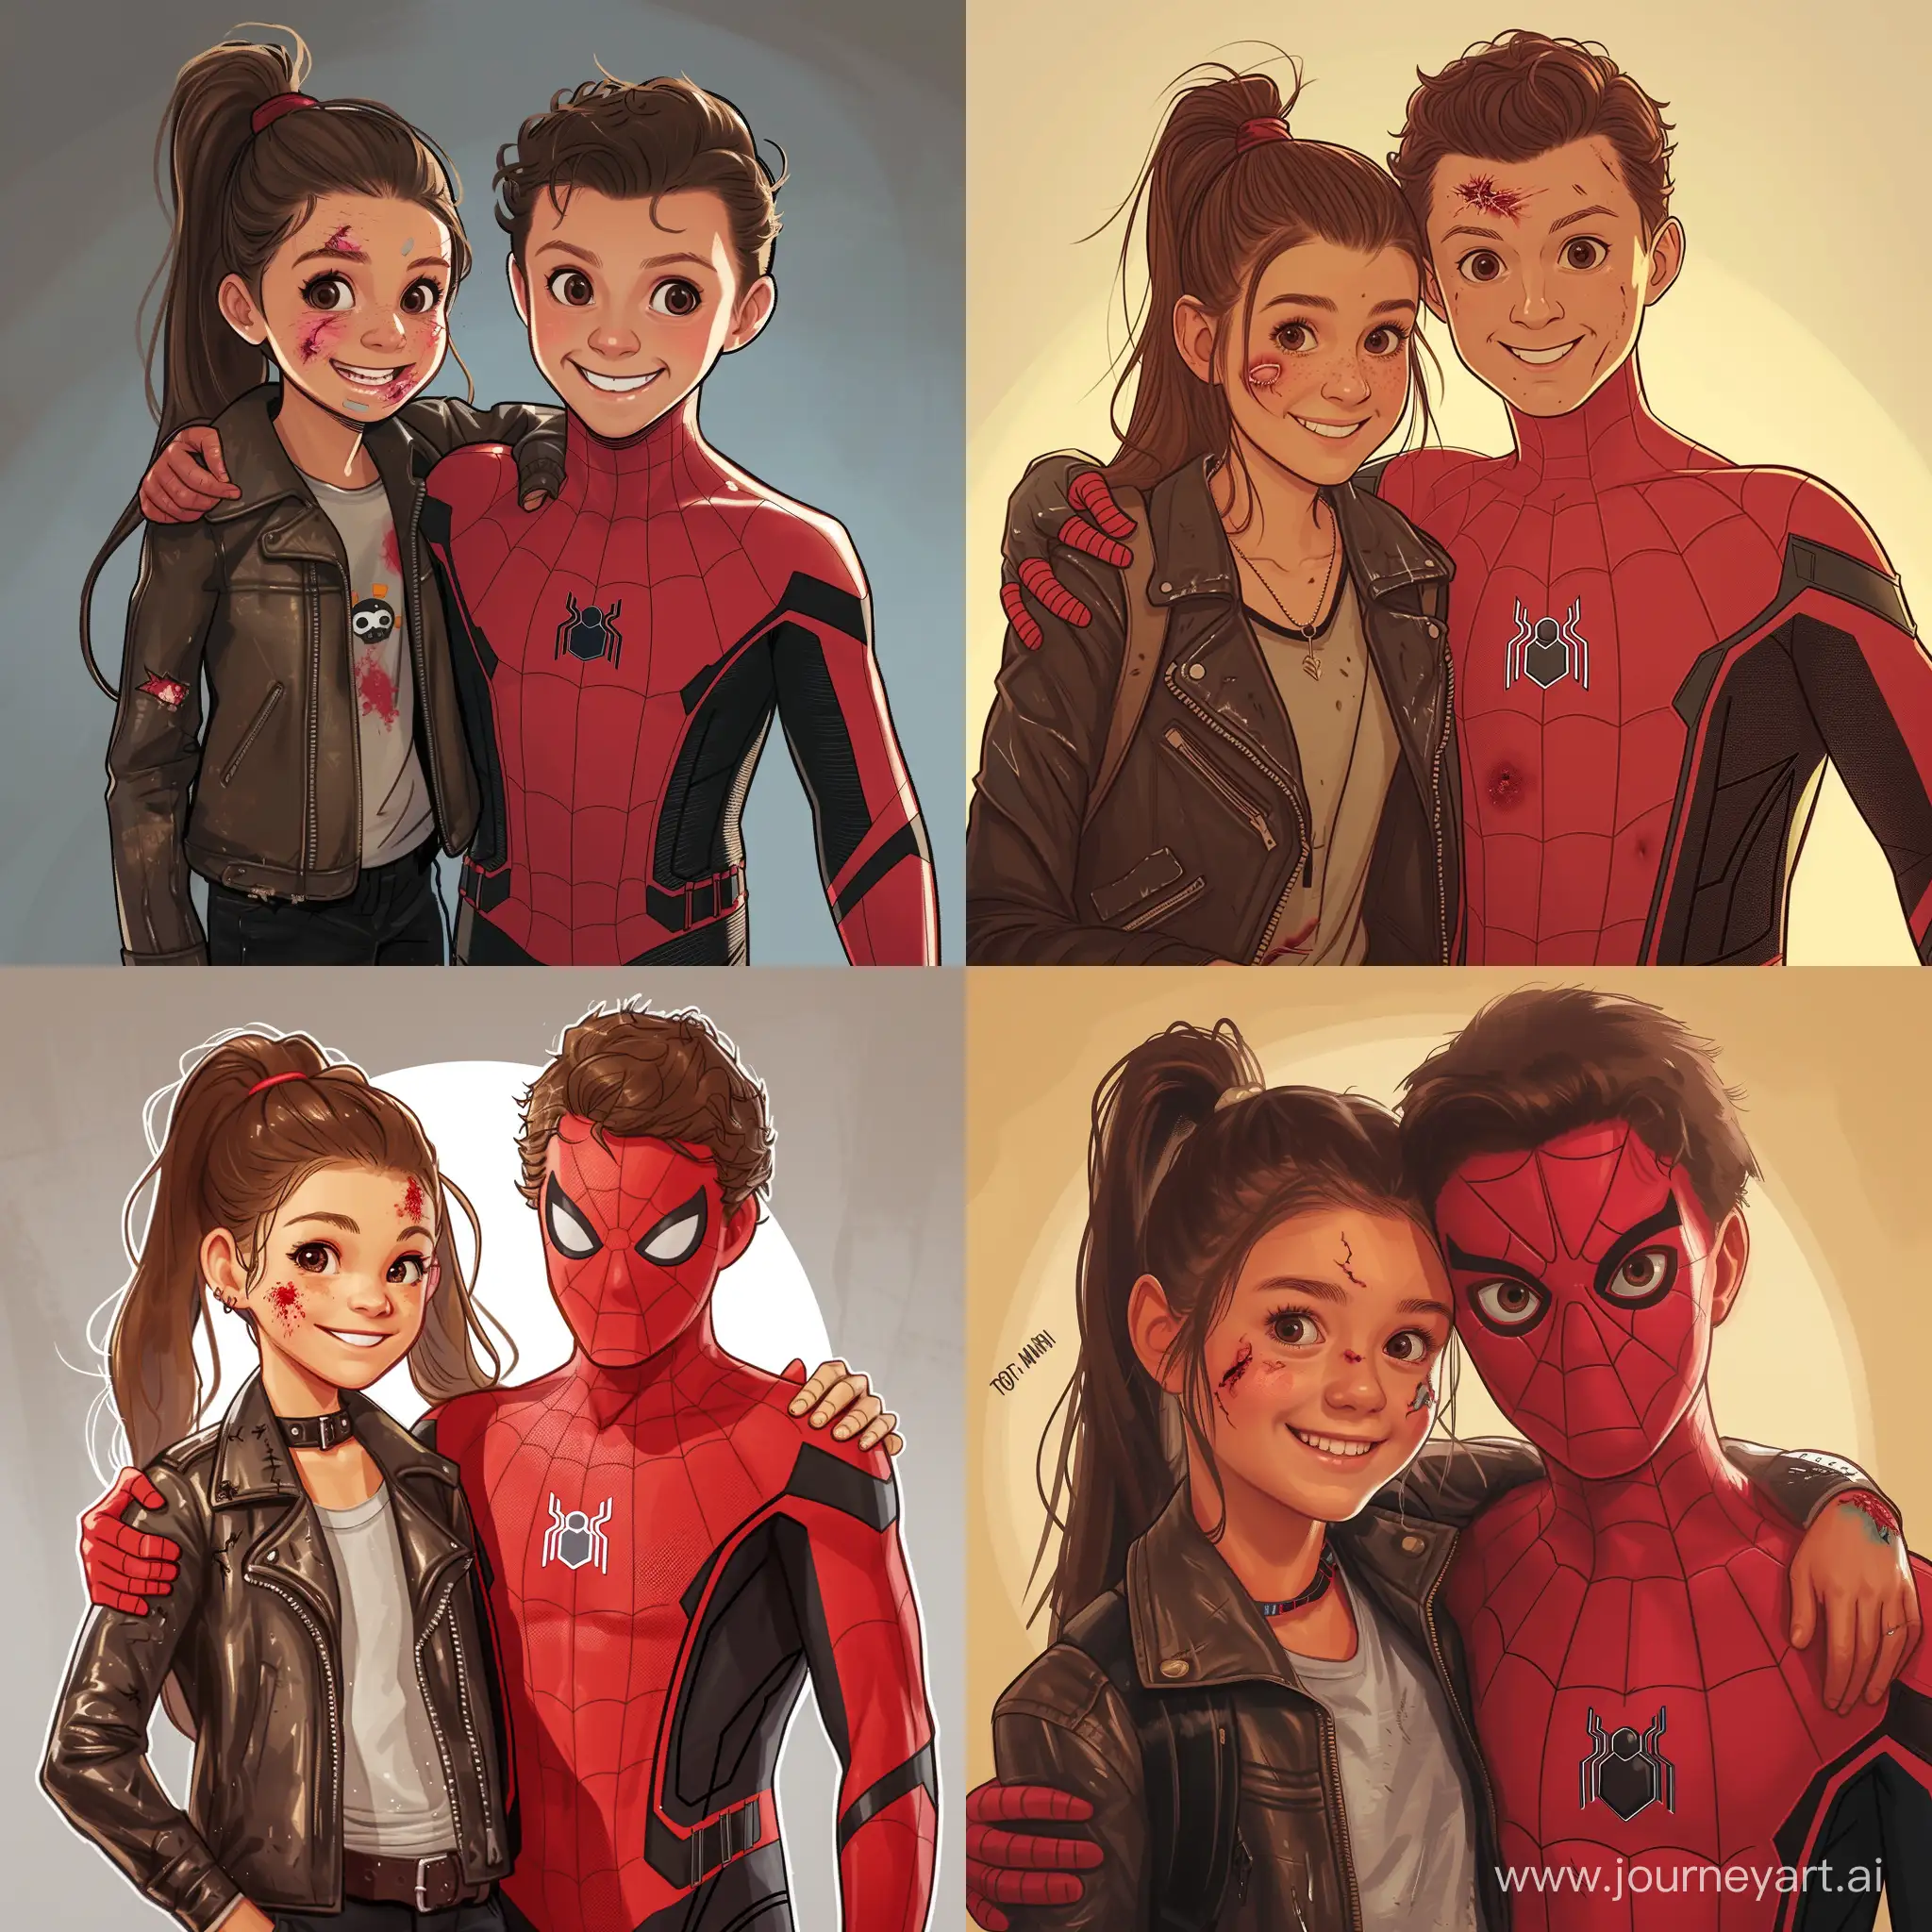 15 year old girl, brown hair in a ponytail, brown eyes, smirk on her face, a small cut on her face, leather jacket, black pants, spider man beside her, spider man has his suit on, spider man has his mask off, he looks like the tom holland spider man, he has a small cut on his face, there is a rip in his suit, he is smiling, he is resting his arm around the girls shoulders, cartoon style